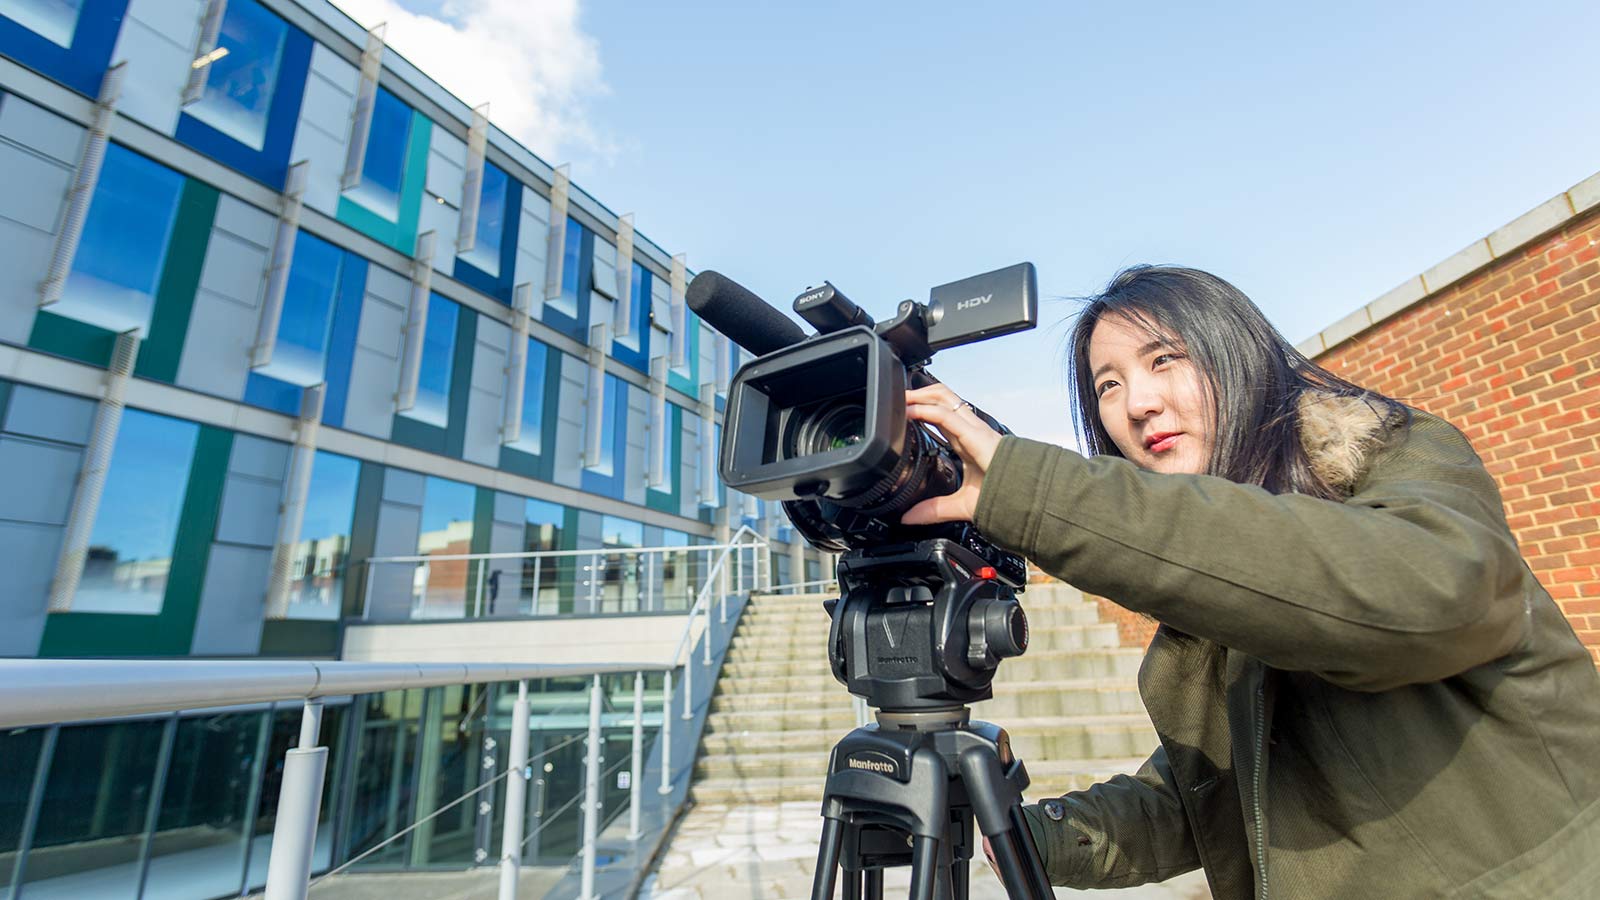 A University of Sussex student filming on campus